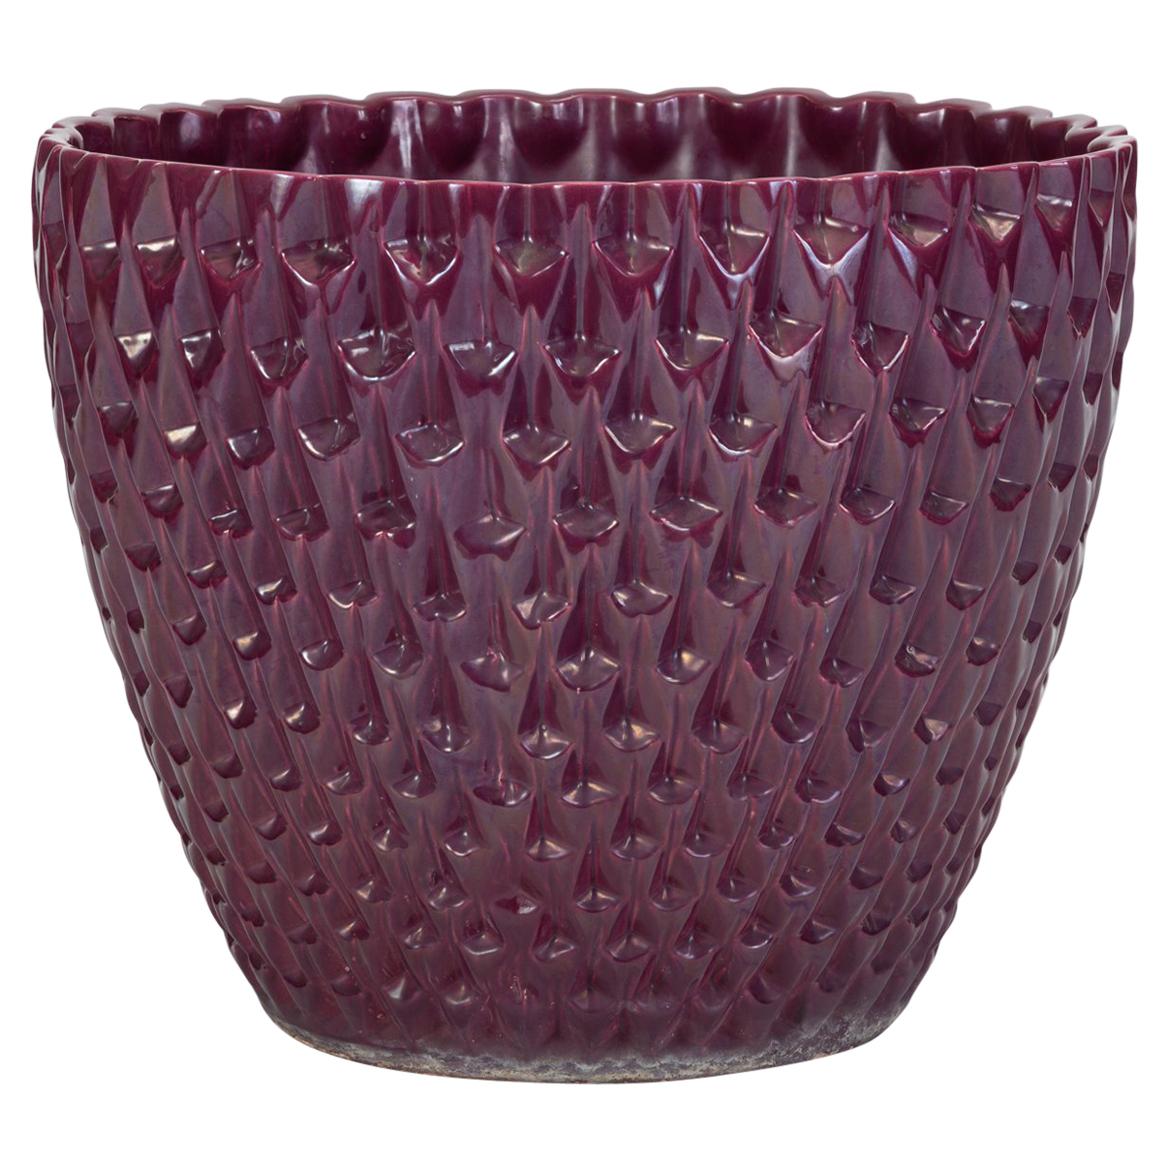 Phoenix-1 Planter in Purple Glaze by David Cressey for Architectural Pottery